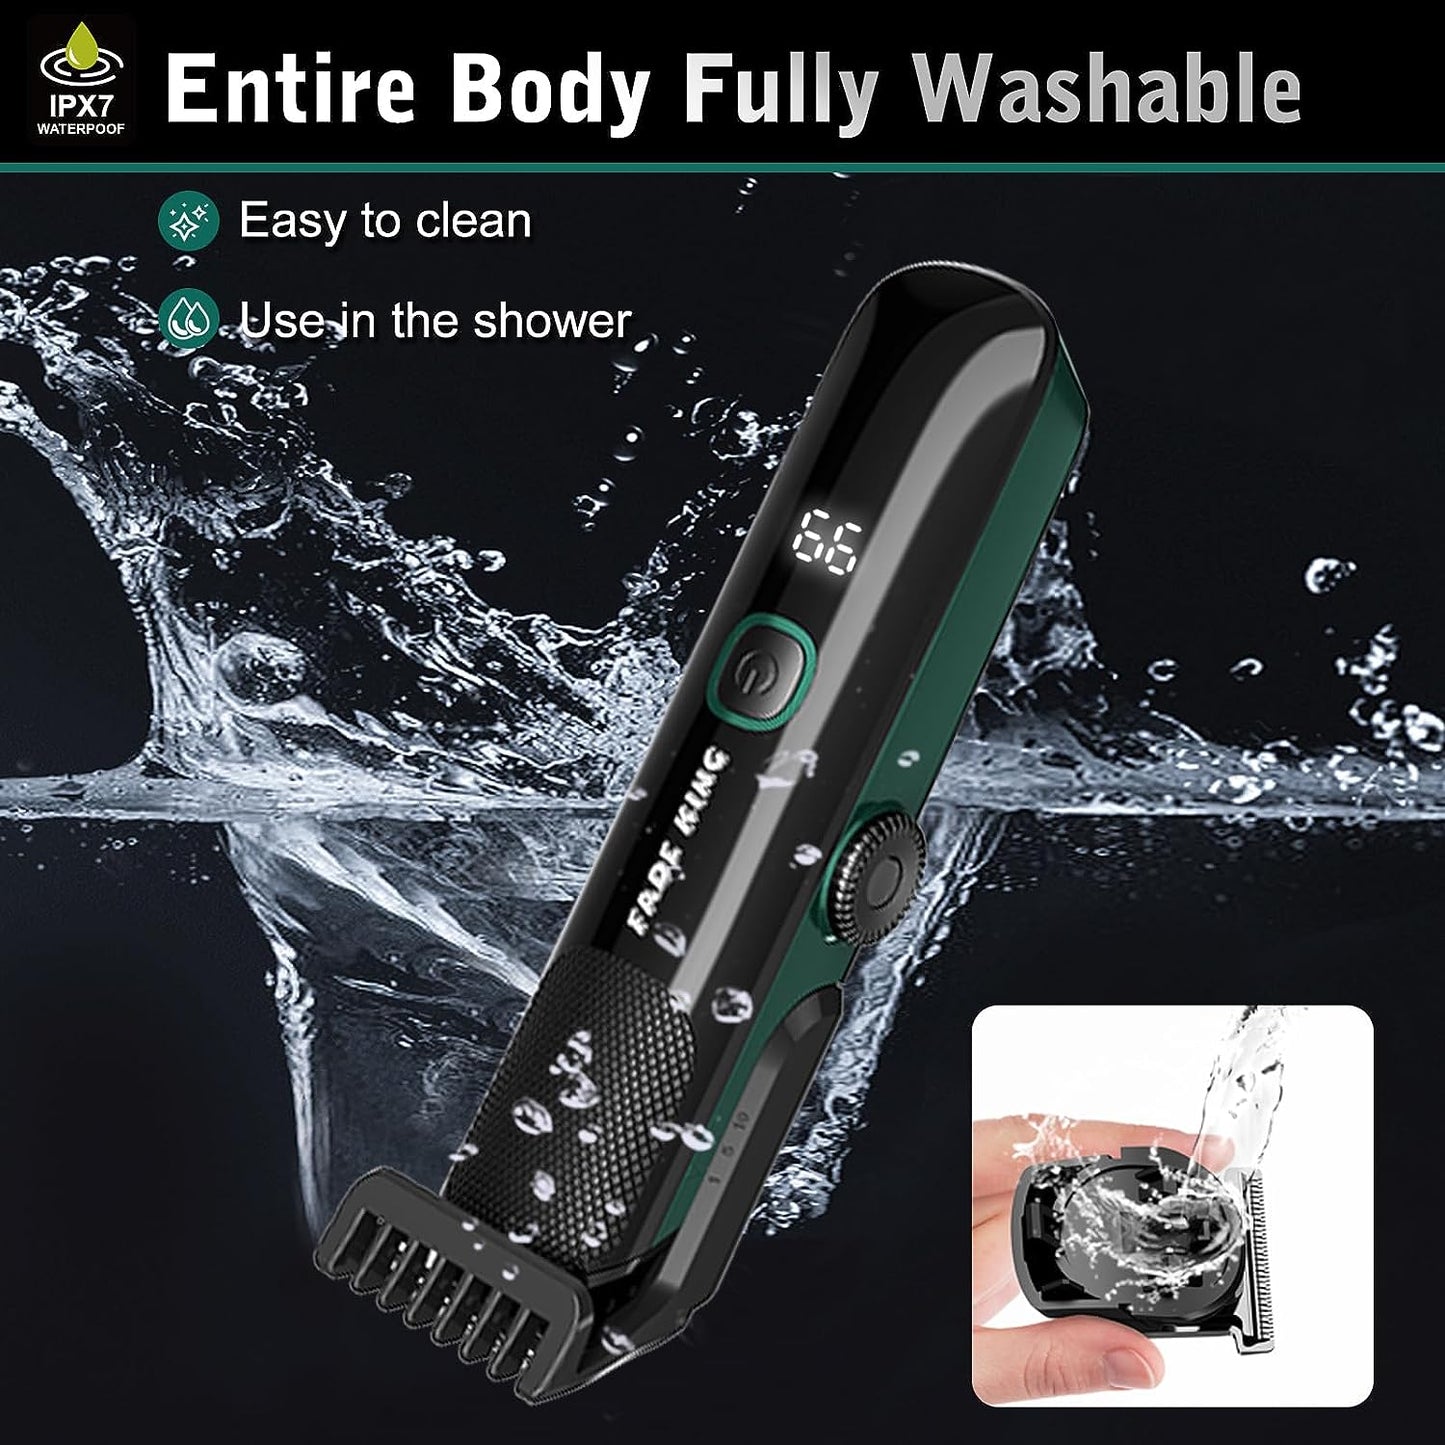 FadeKing All-in-One Beard Trimmer Set - Waterproof Men's Grooming Kit with 20 Length Settings, Adjustable Blade Wheel, and Travel Case for Perfect Beard, Face, Nose, and Ear Trimming - Ideal Gift for Him